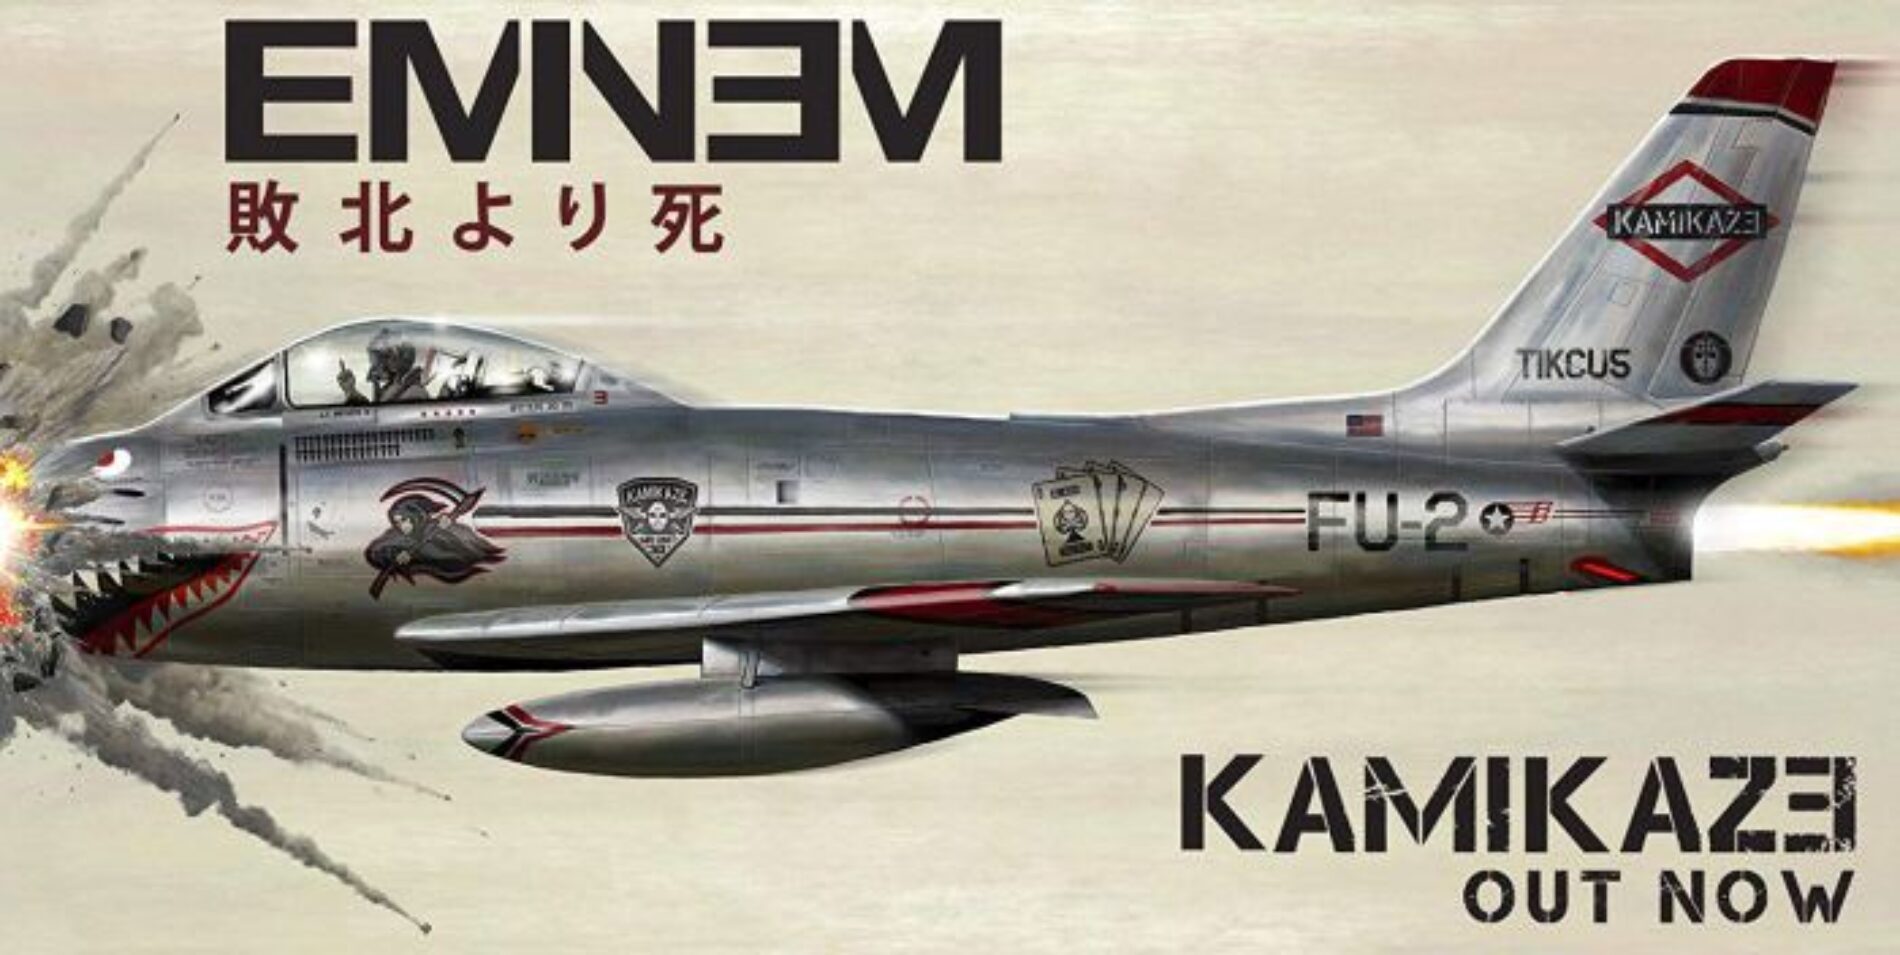 Eminem Drops New Album Called “Kamikaze” on Day of Aretha Franklin’s Funeral, Articles are Bad